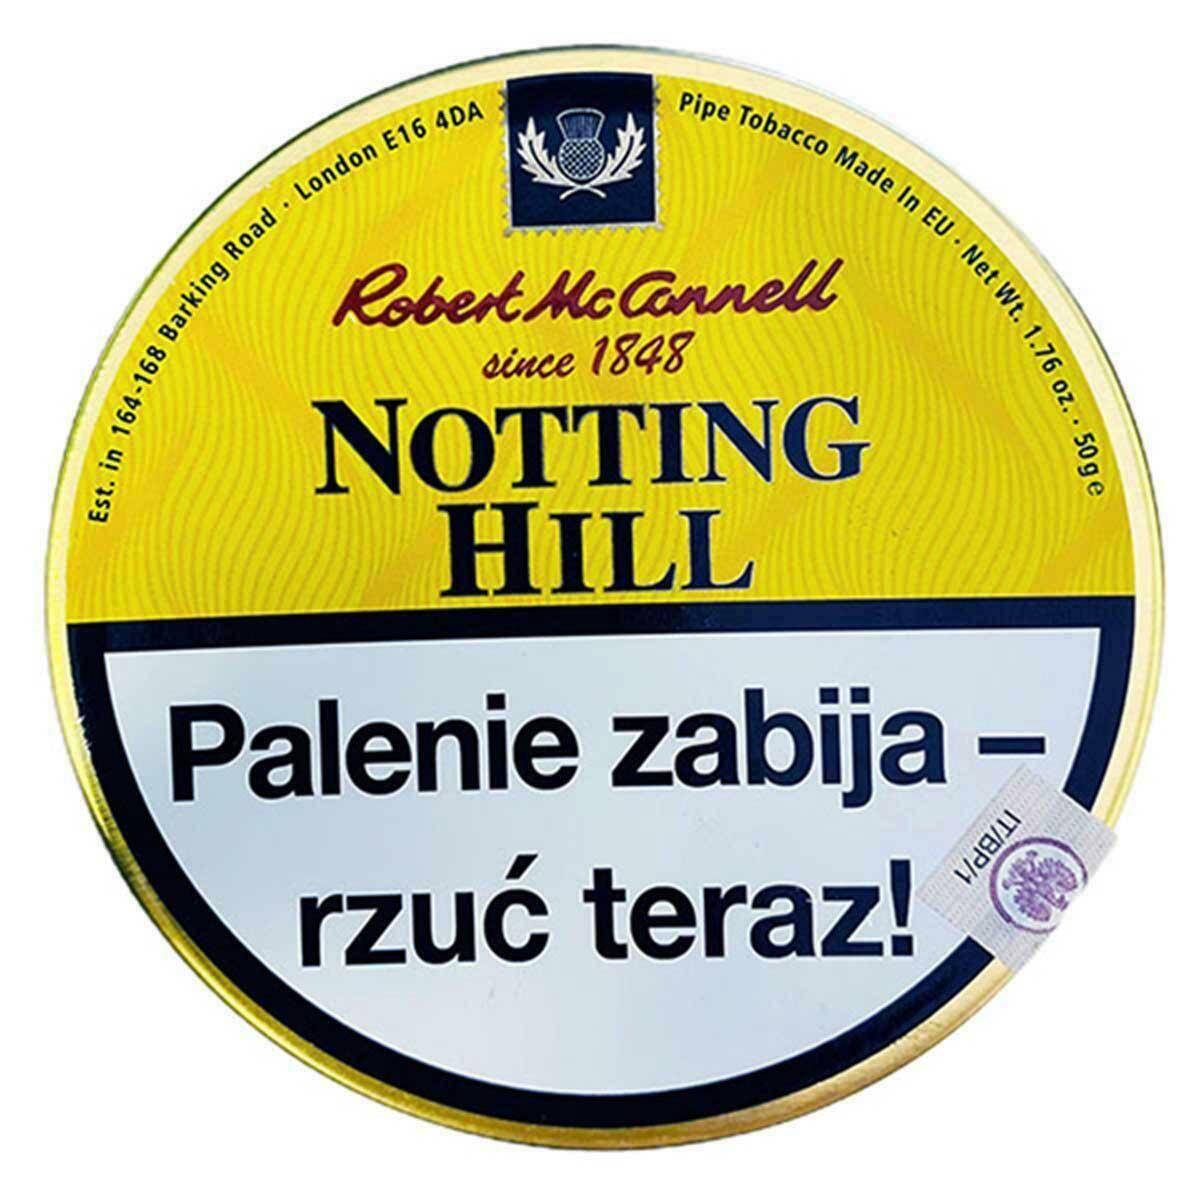 B23-Tobacco McConnell Notting Hill 50g (69,90)